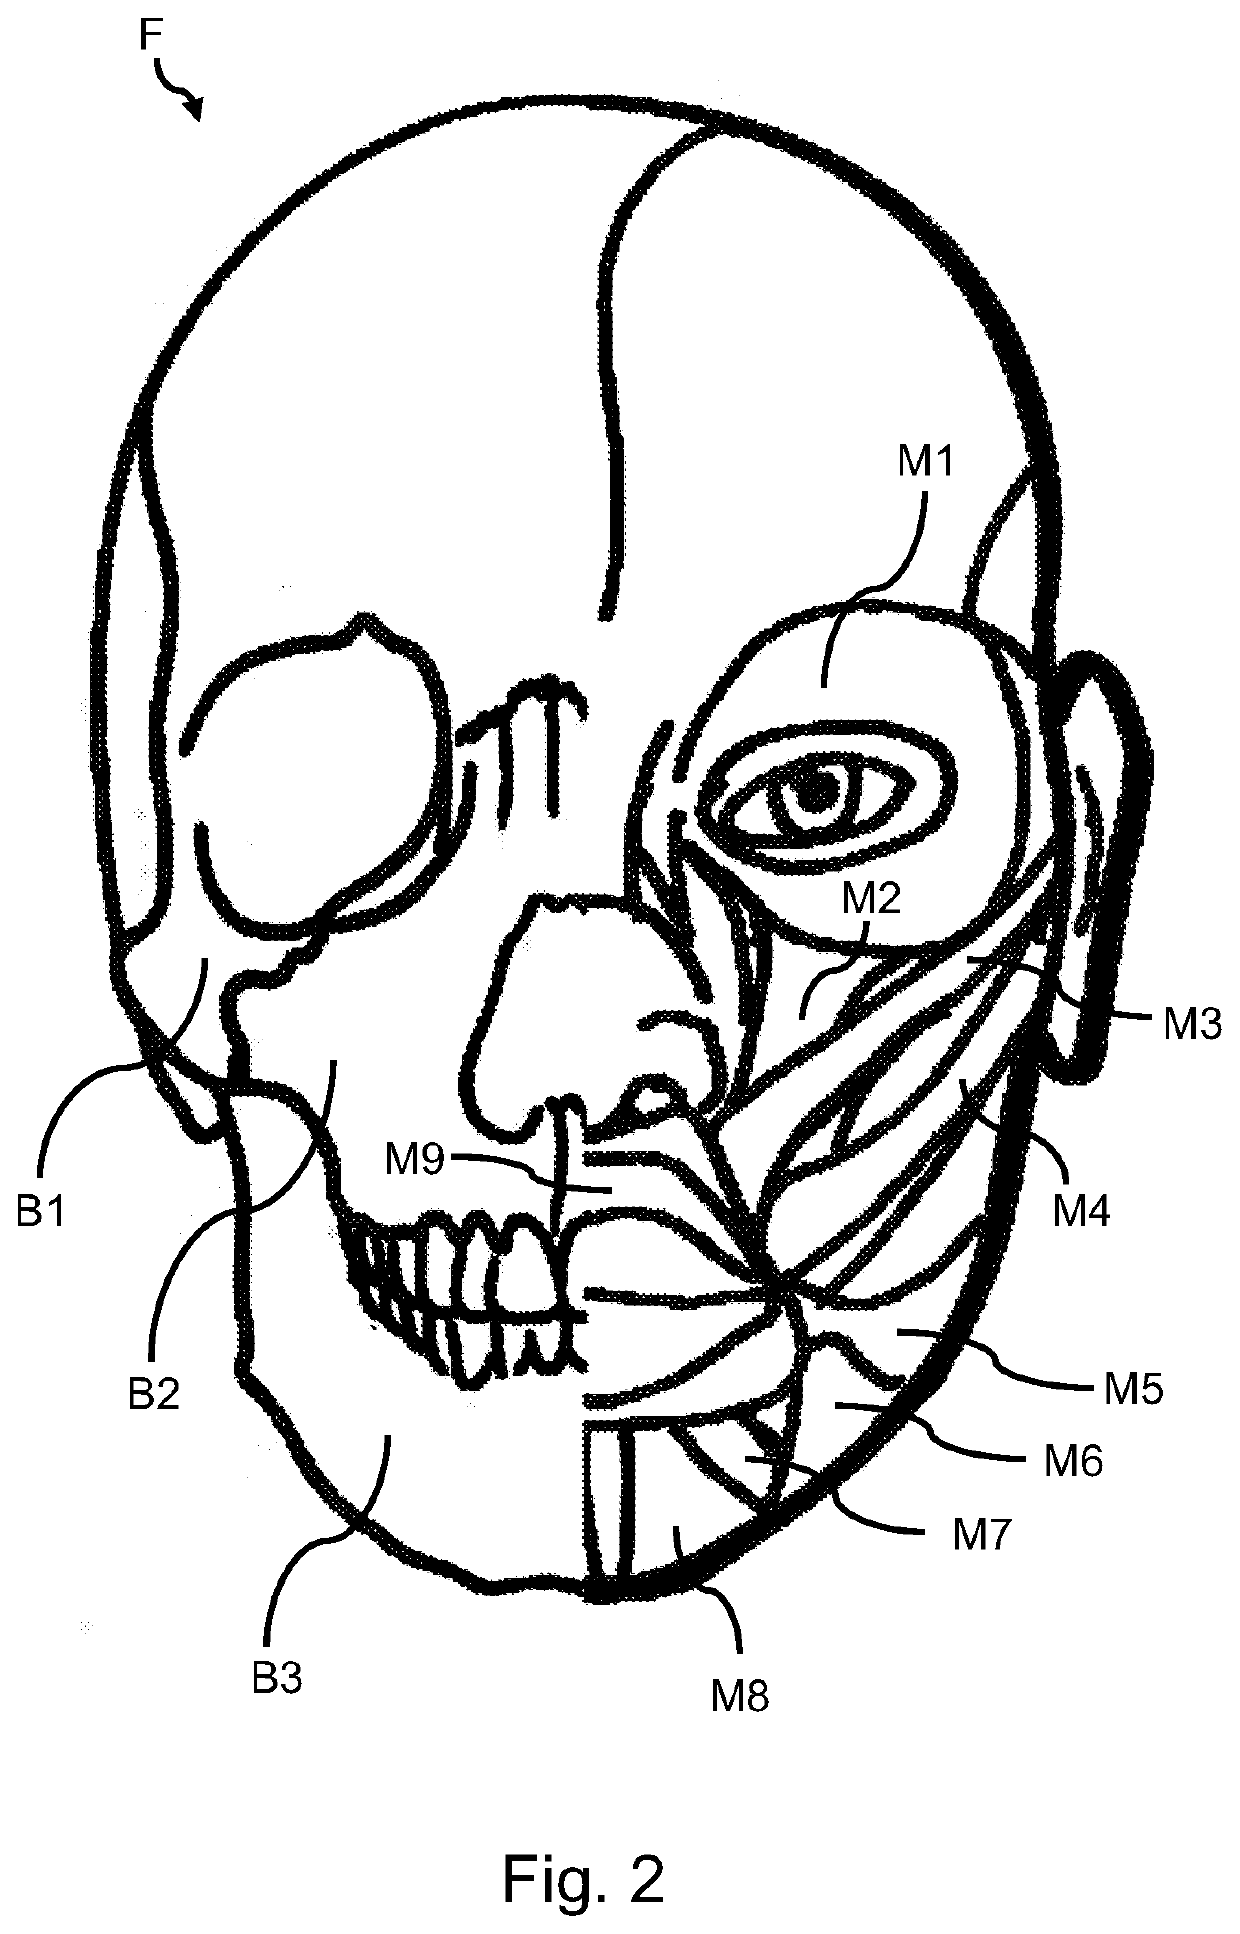 Apparatus for strengthening facial bones and muscle in cosmetic, stroke, and idiopathic facial paralysis patients and methods of use